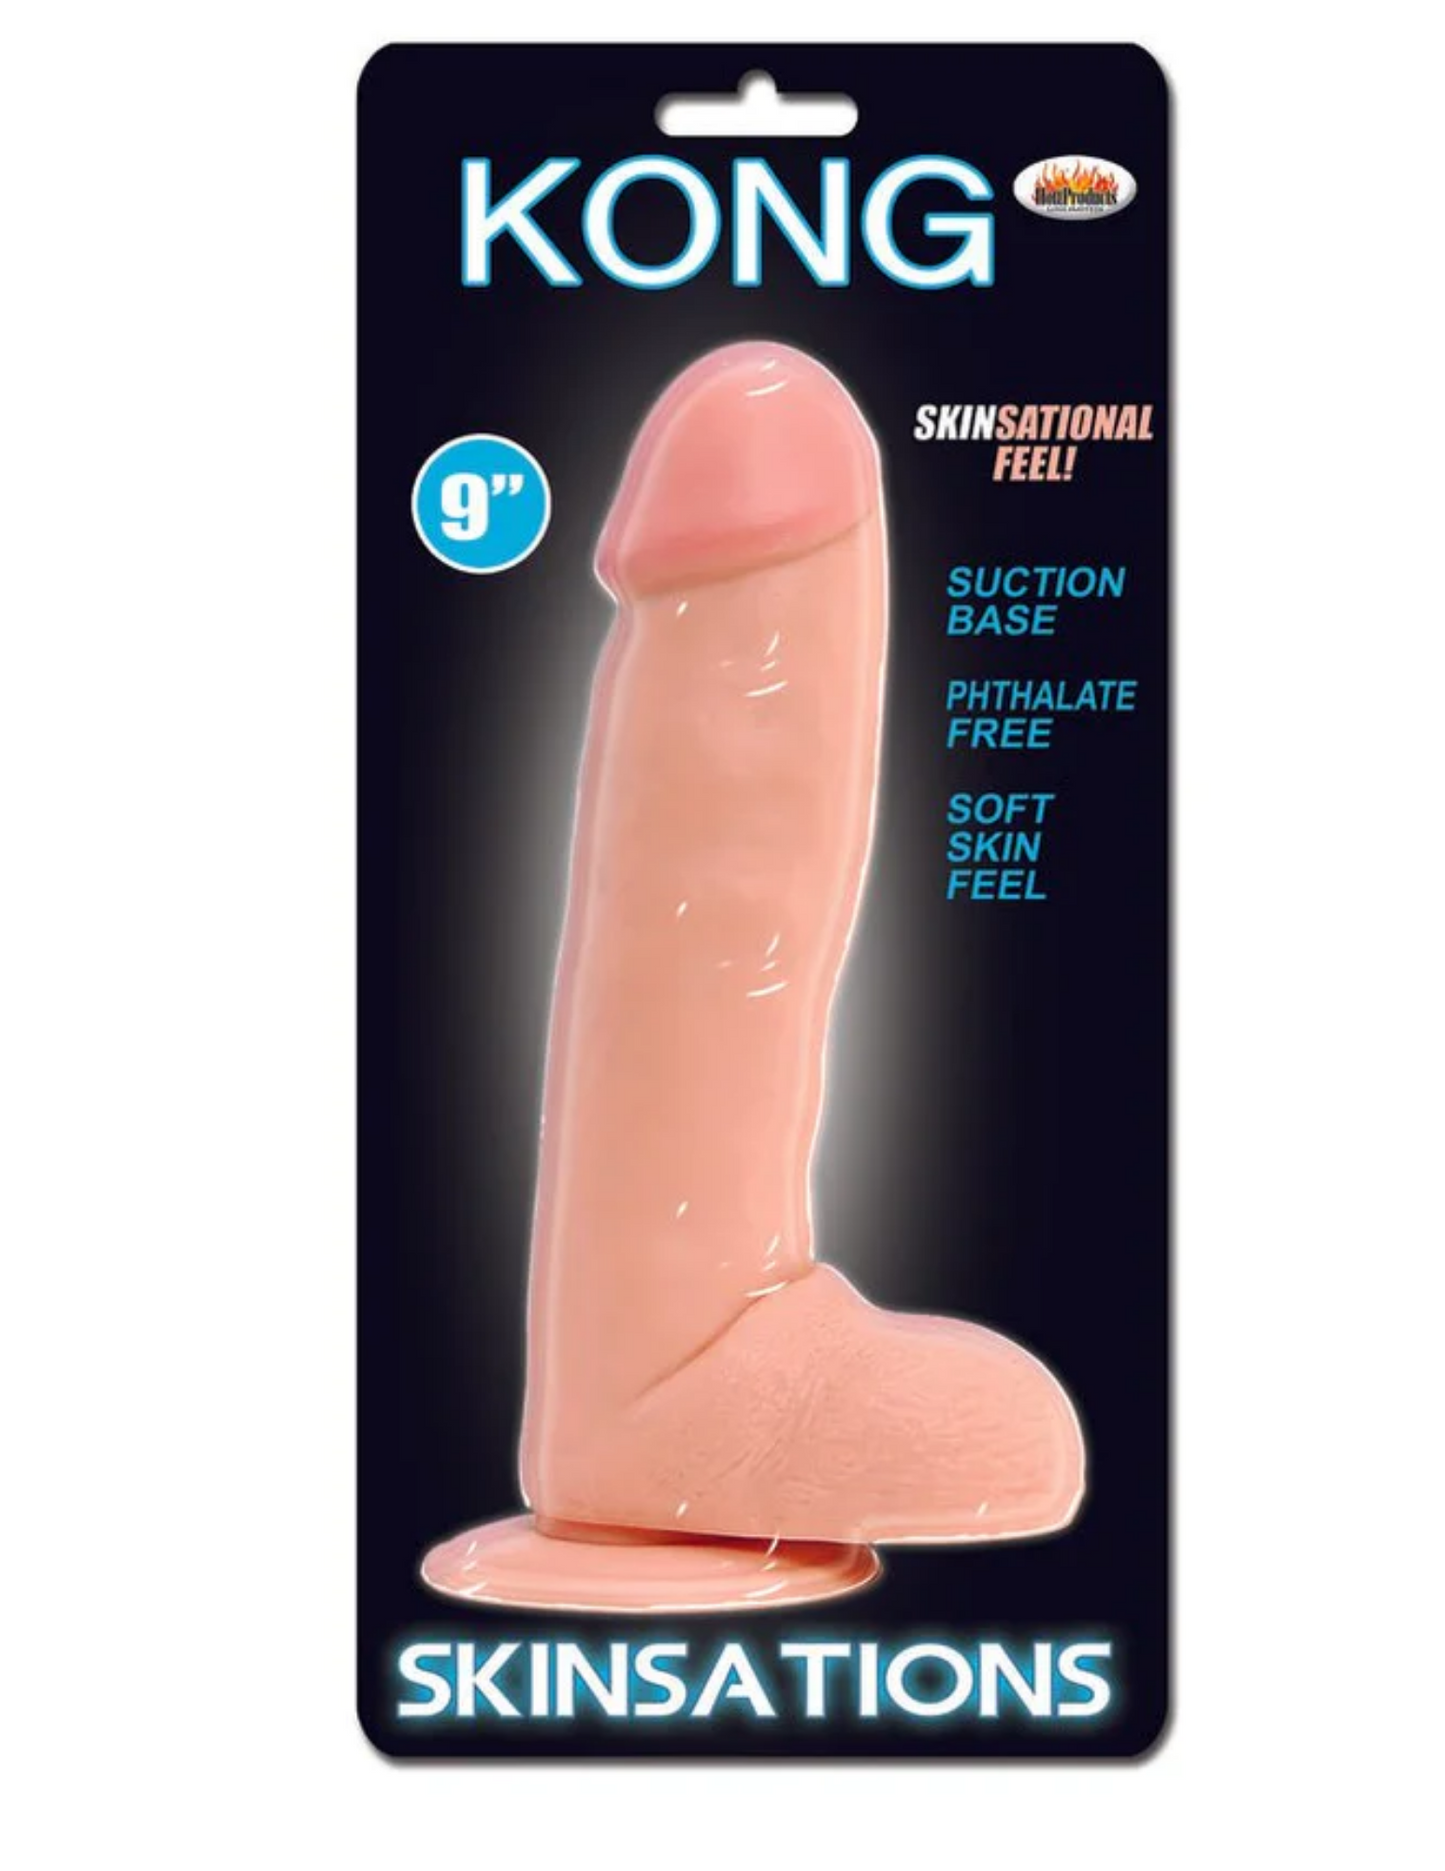 Photo of the product and package for the Skinsations Kong Dildo from Hott Products.